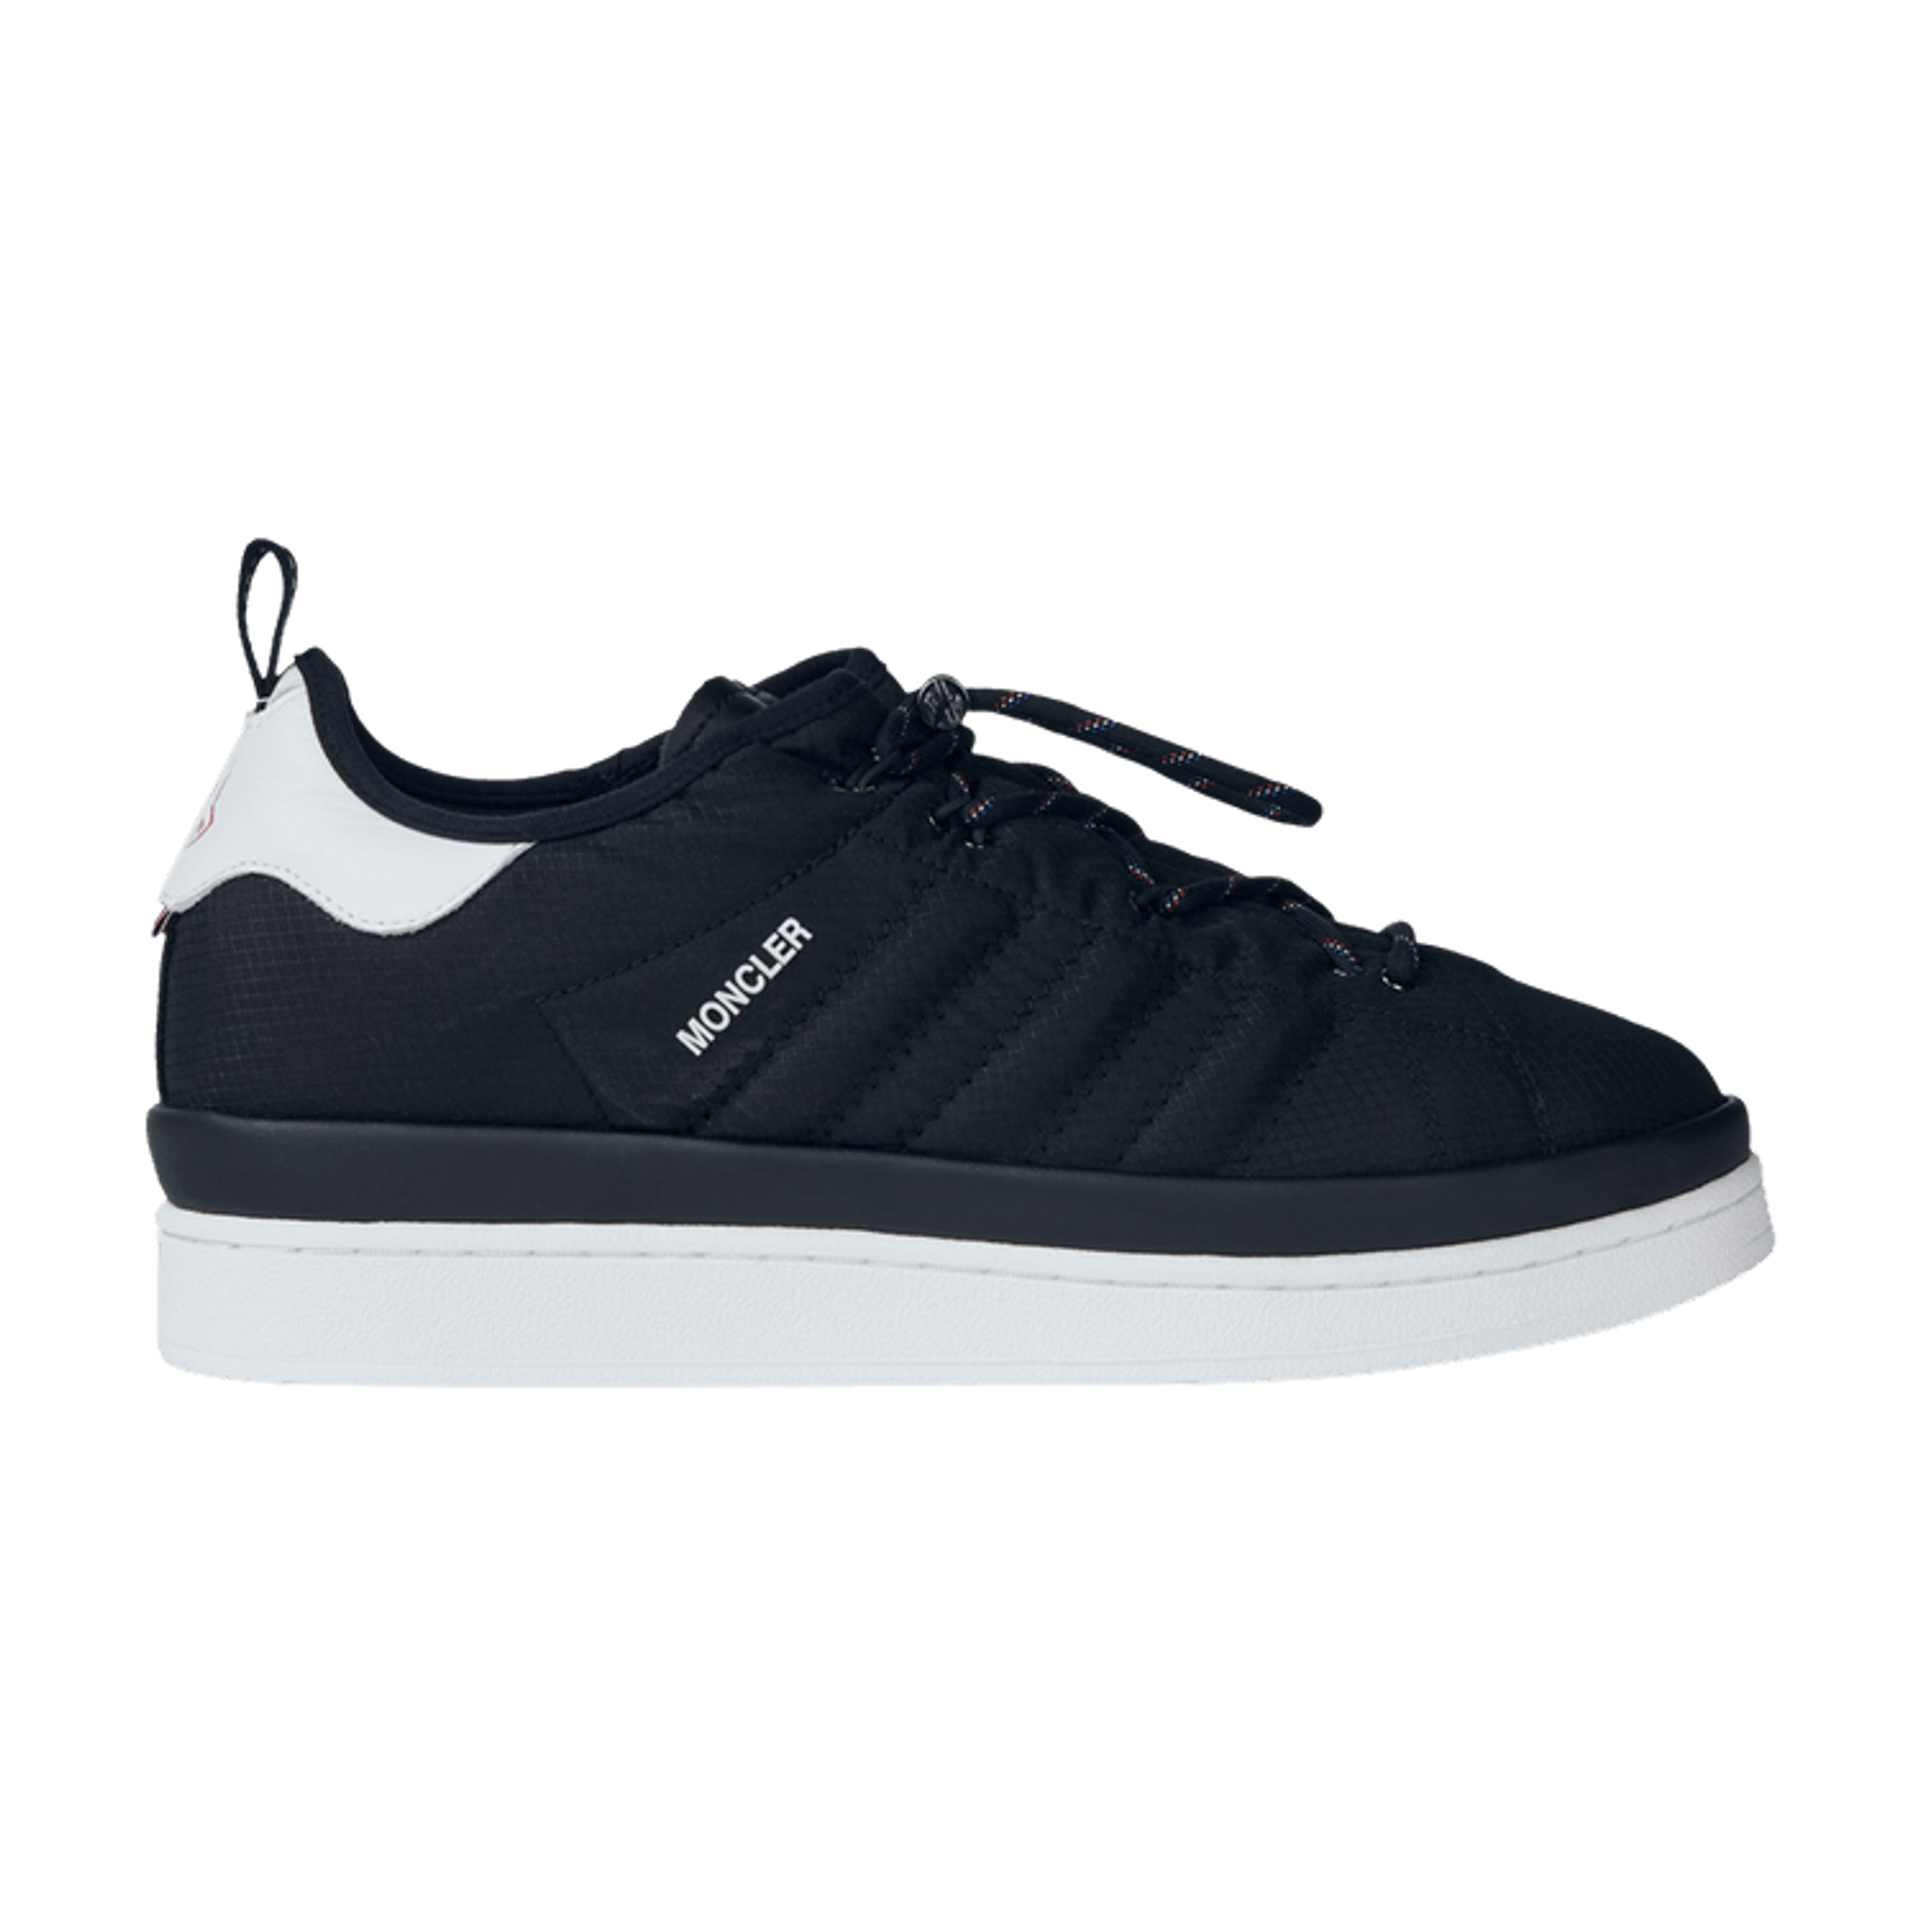 Moncler x adidas Campus 'The Art of Exploration - Black White'